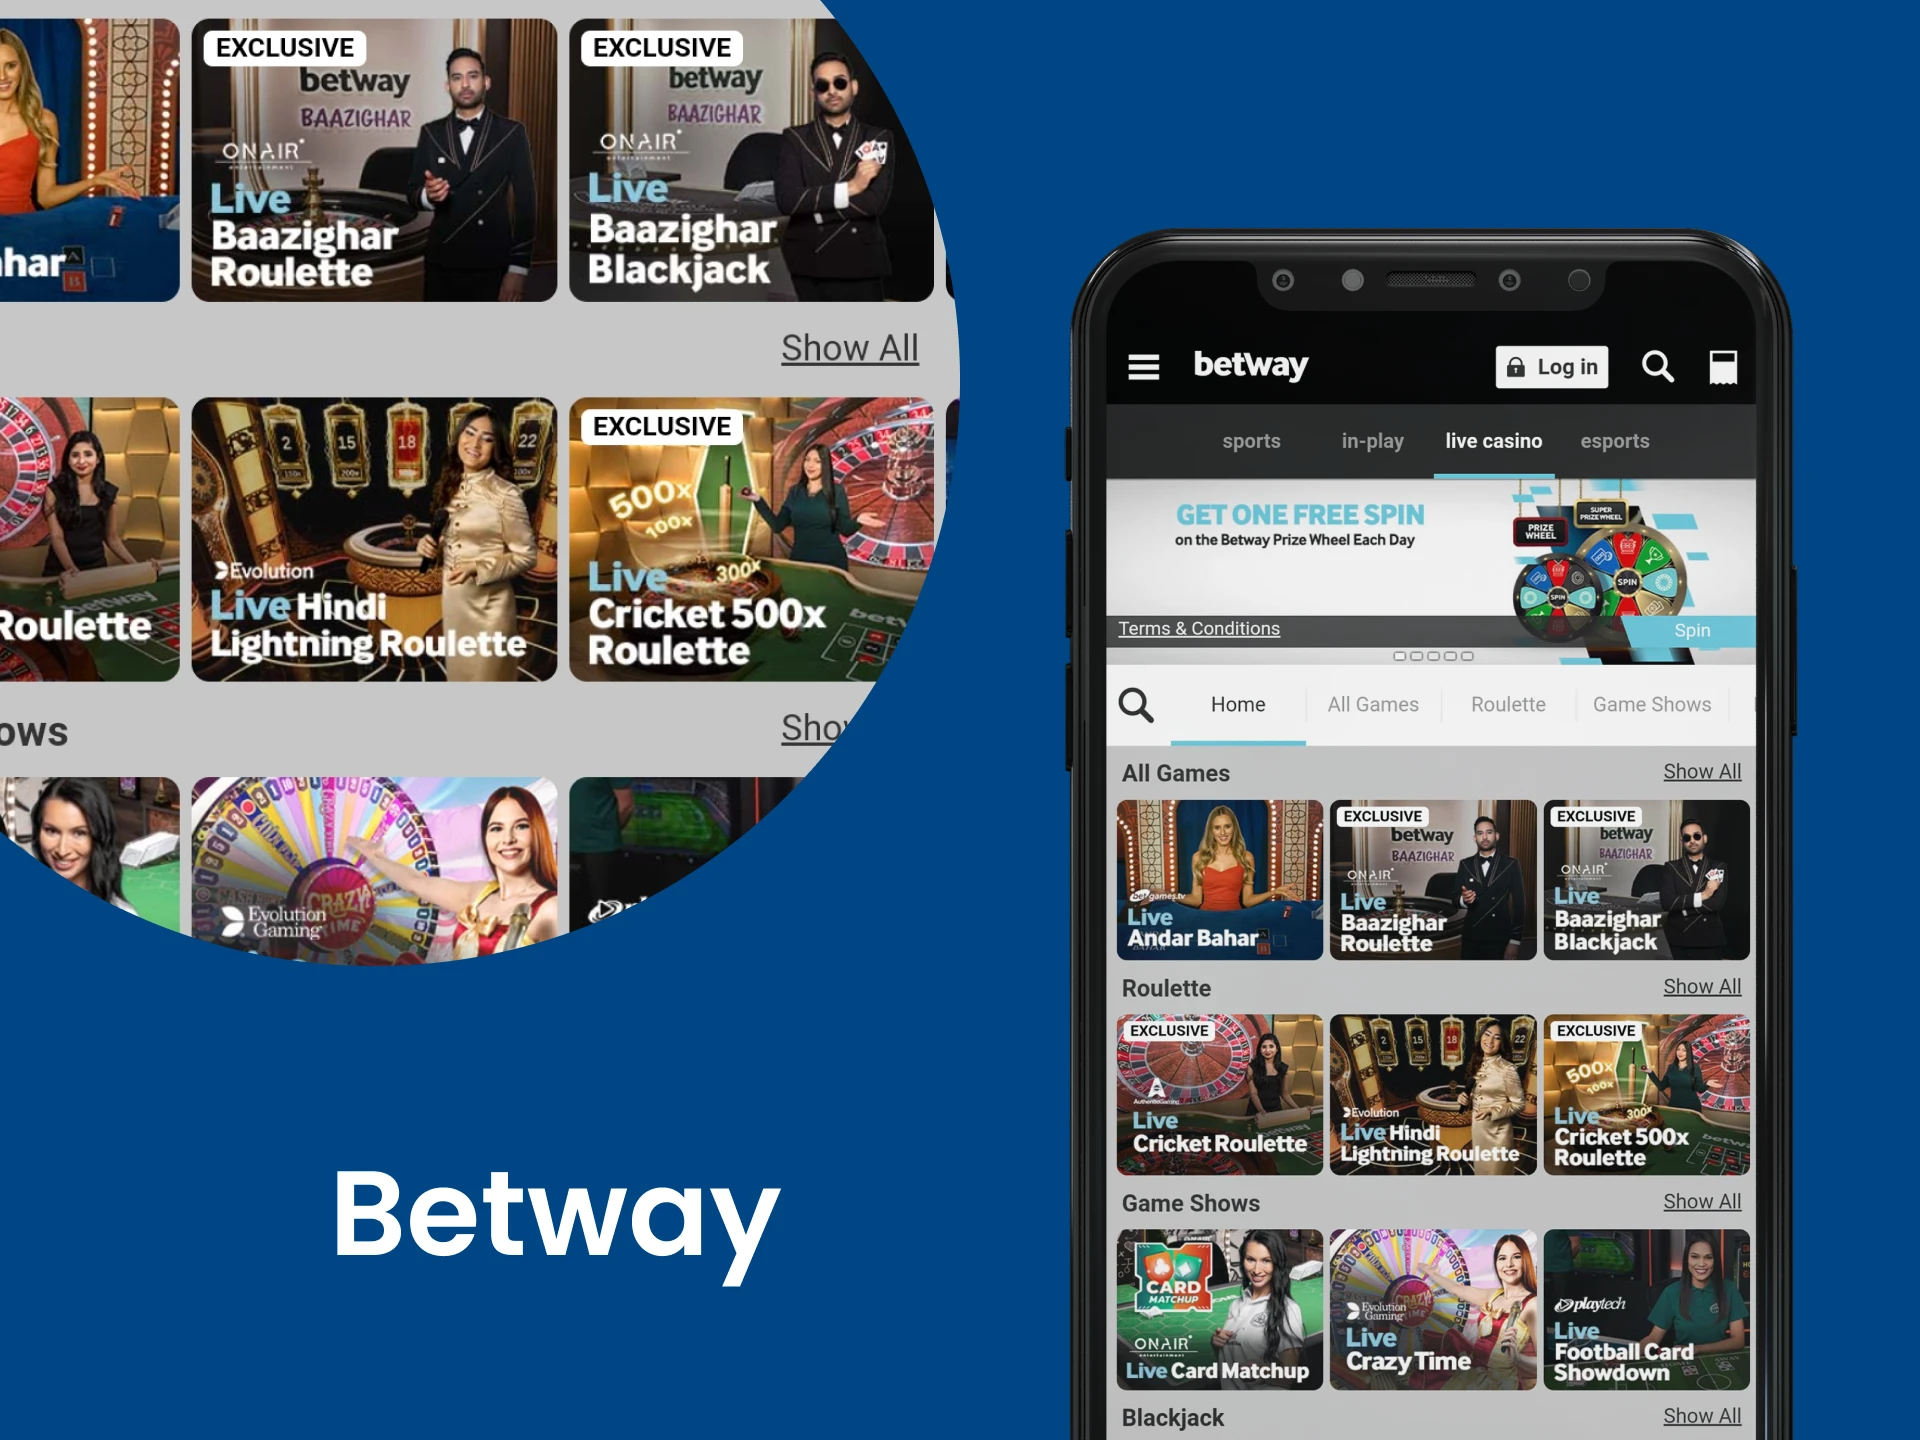 Download the Betway app for casino games.